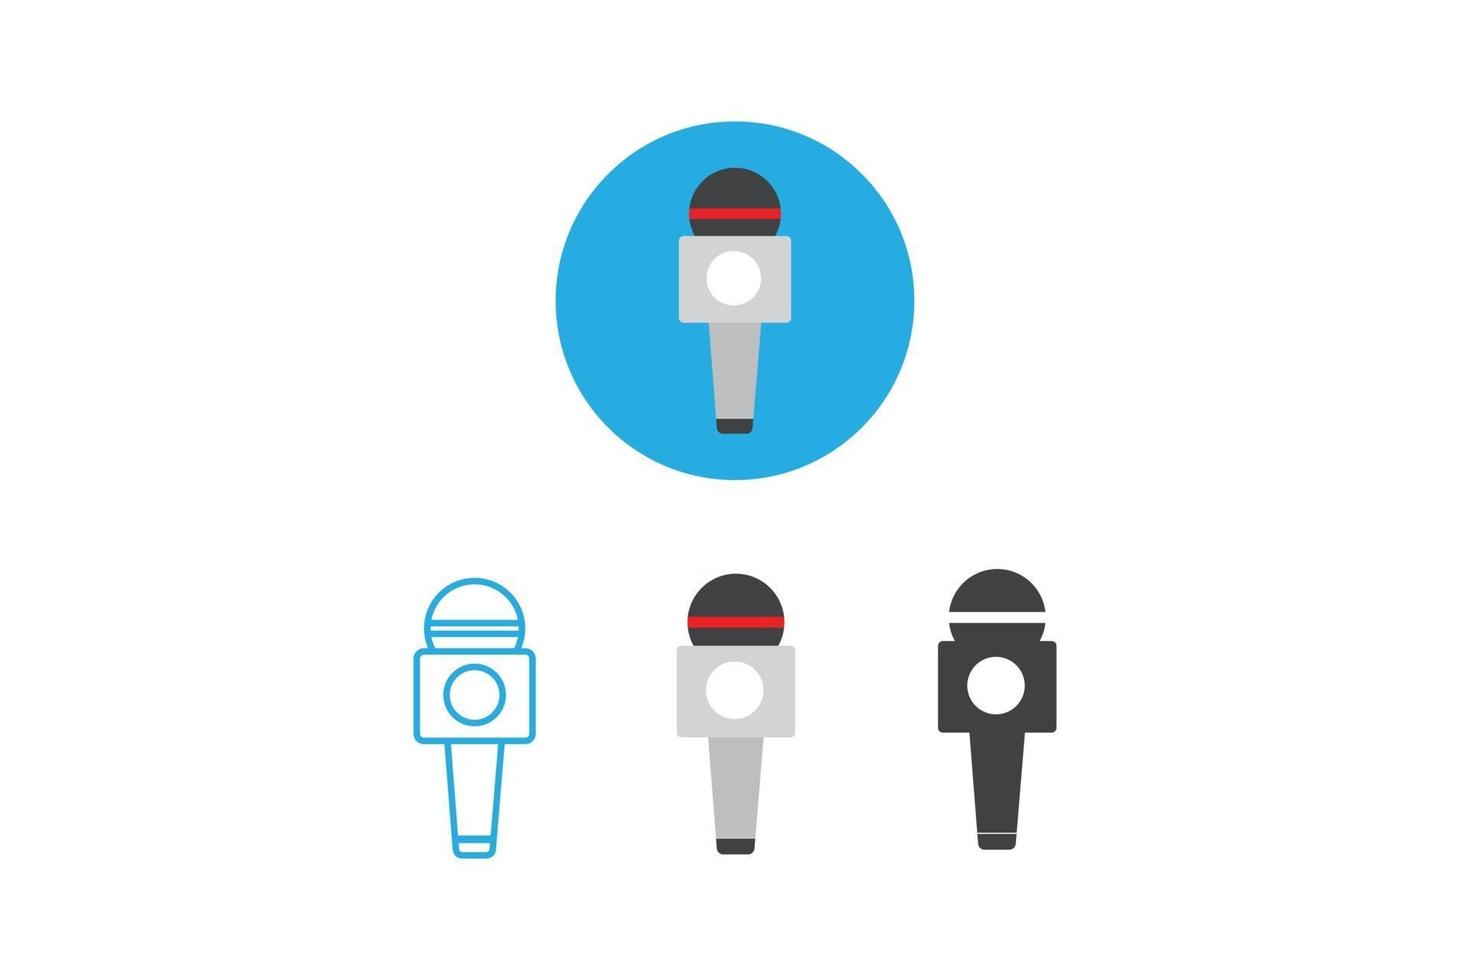 microphone icon flat design style vector